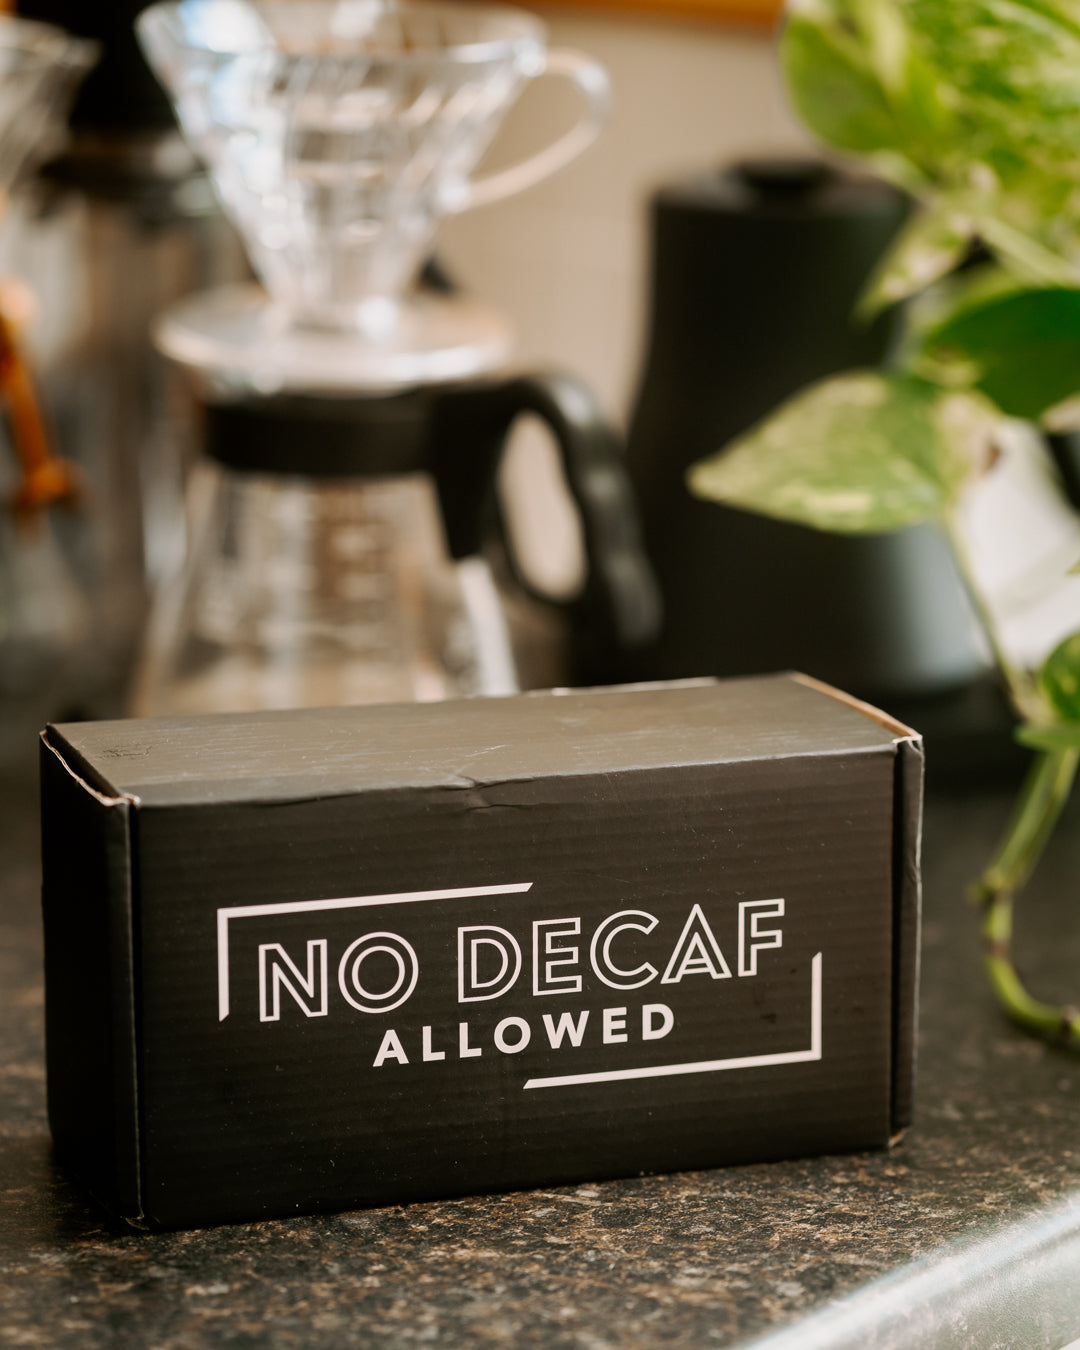 NO DECAF ALLOWED coffee subscription delivered to you